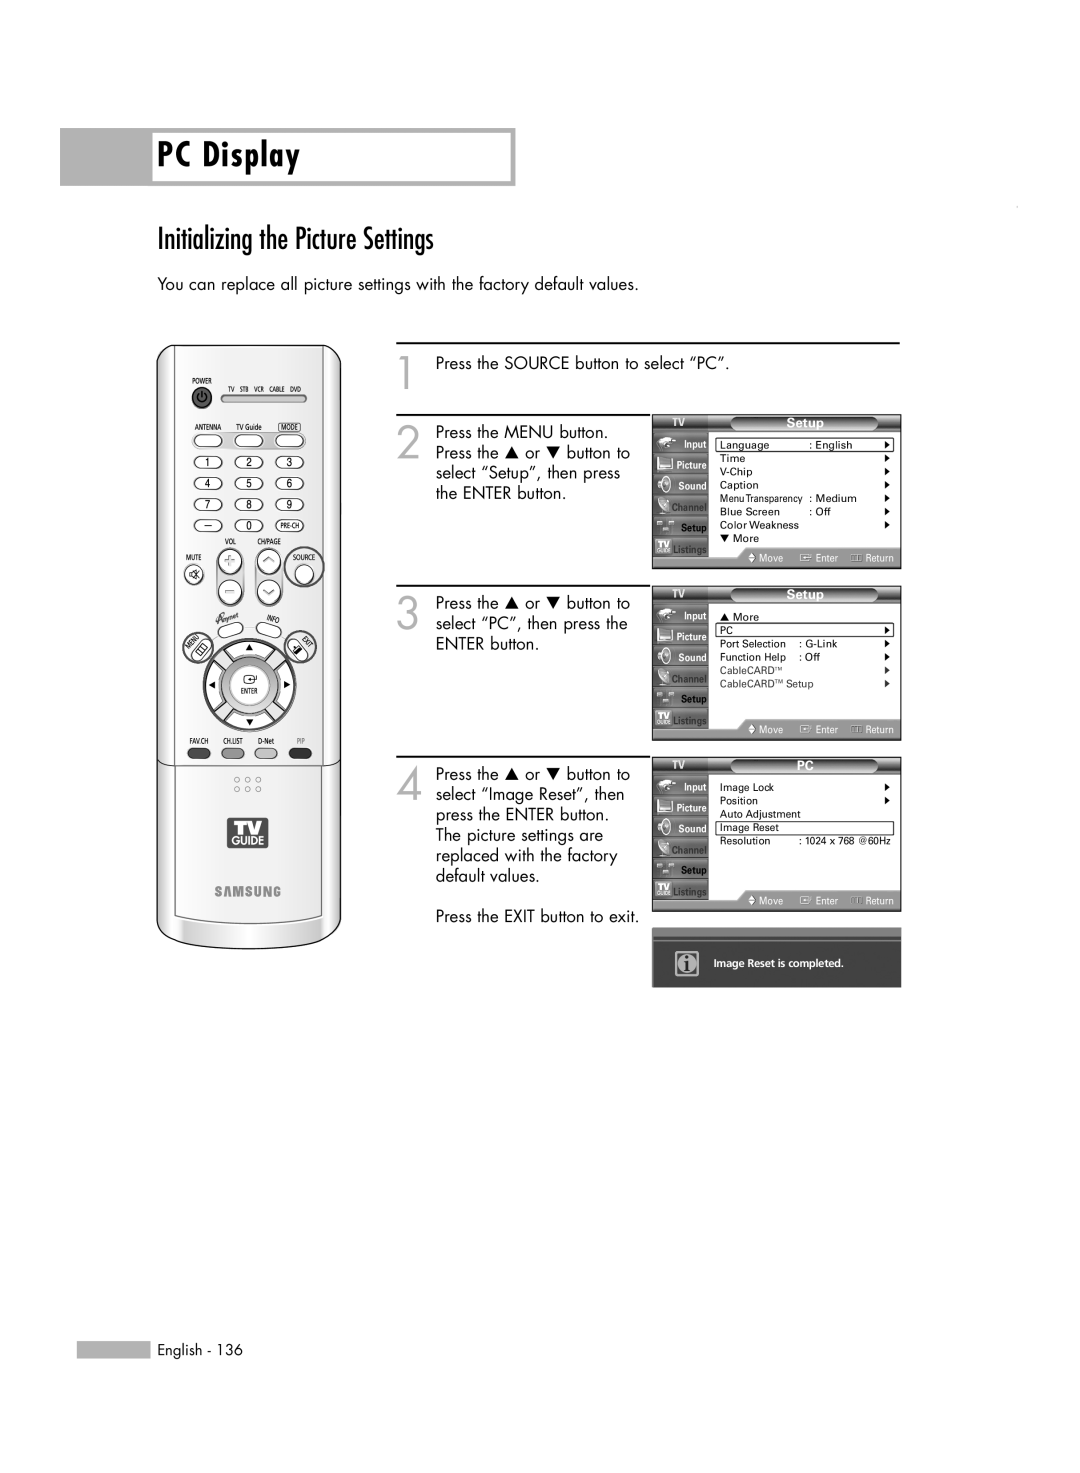 Samsung HL-R5678W, HL-R6178W, HL-R7178W manual Initializing the Picture Settings, PC Display 